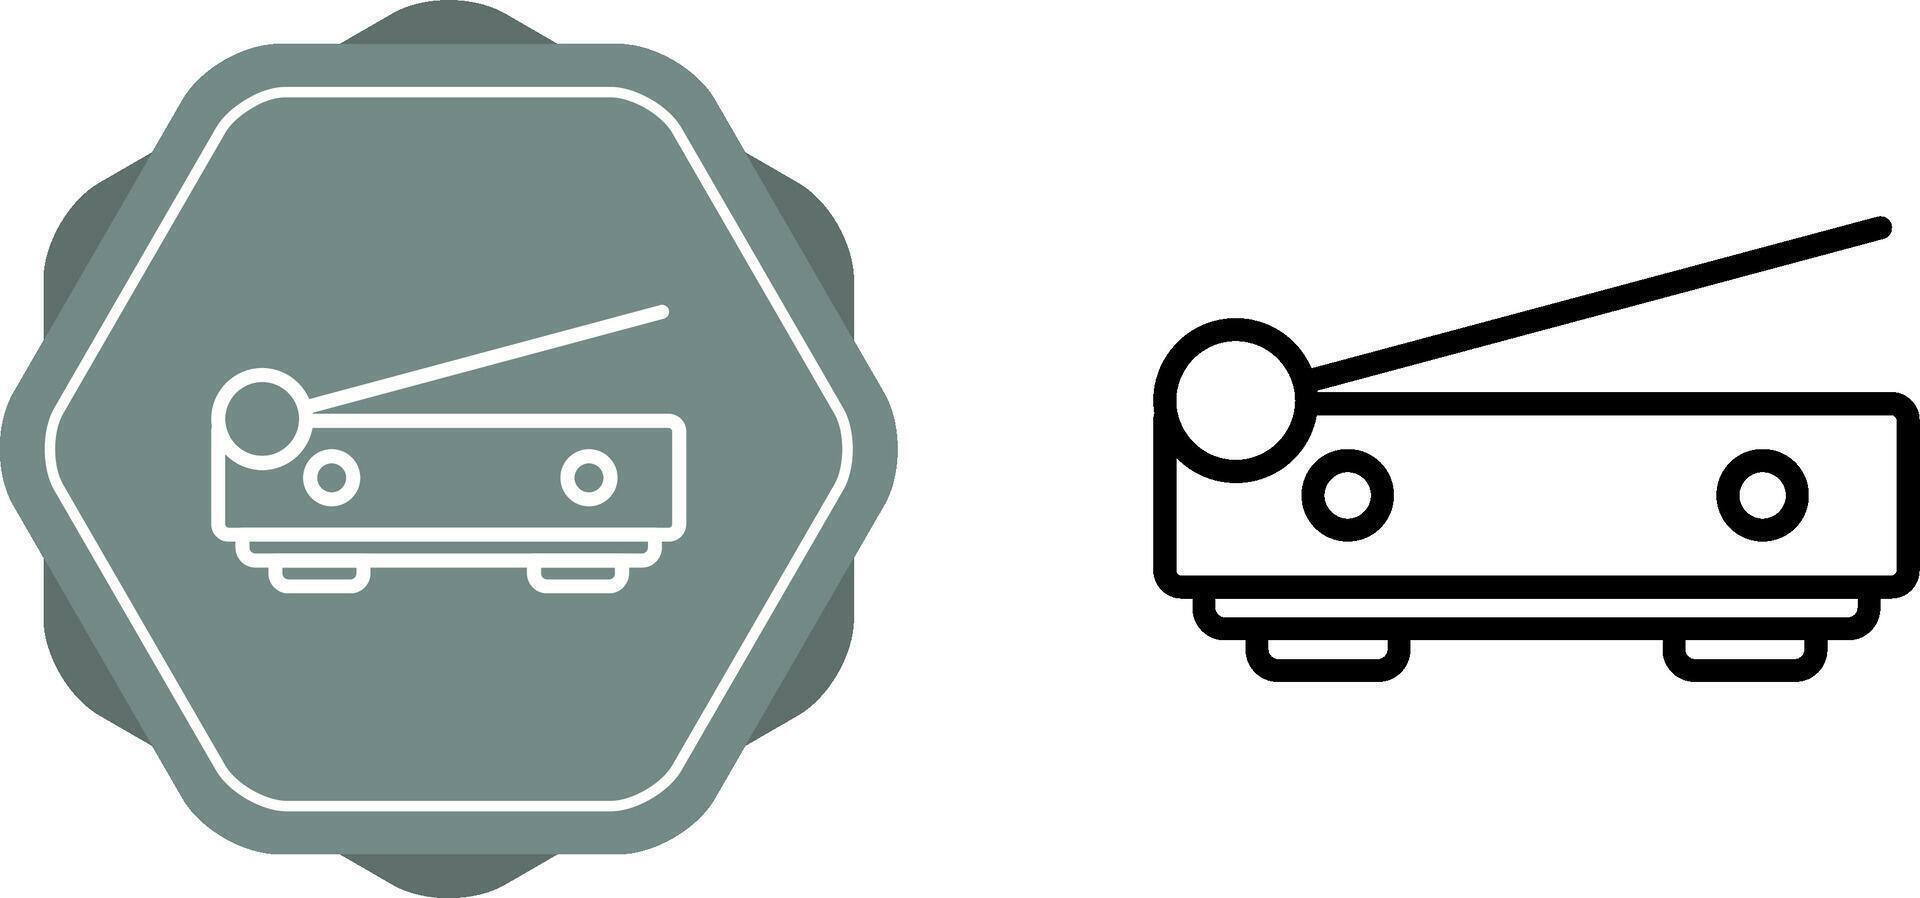 3D Scanner Vector Icon